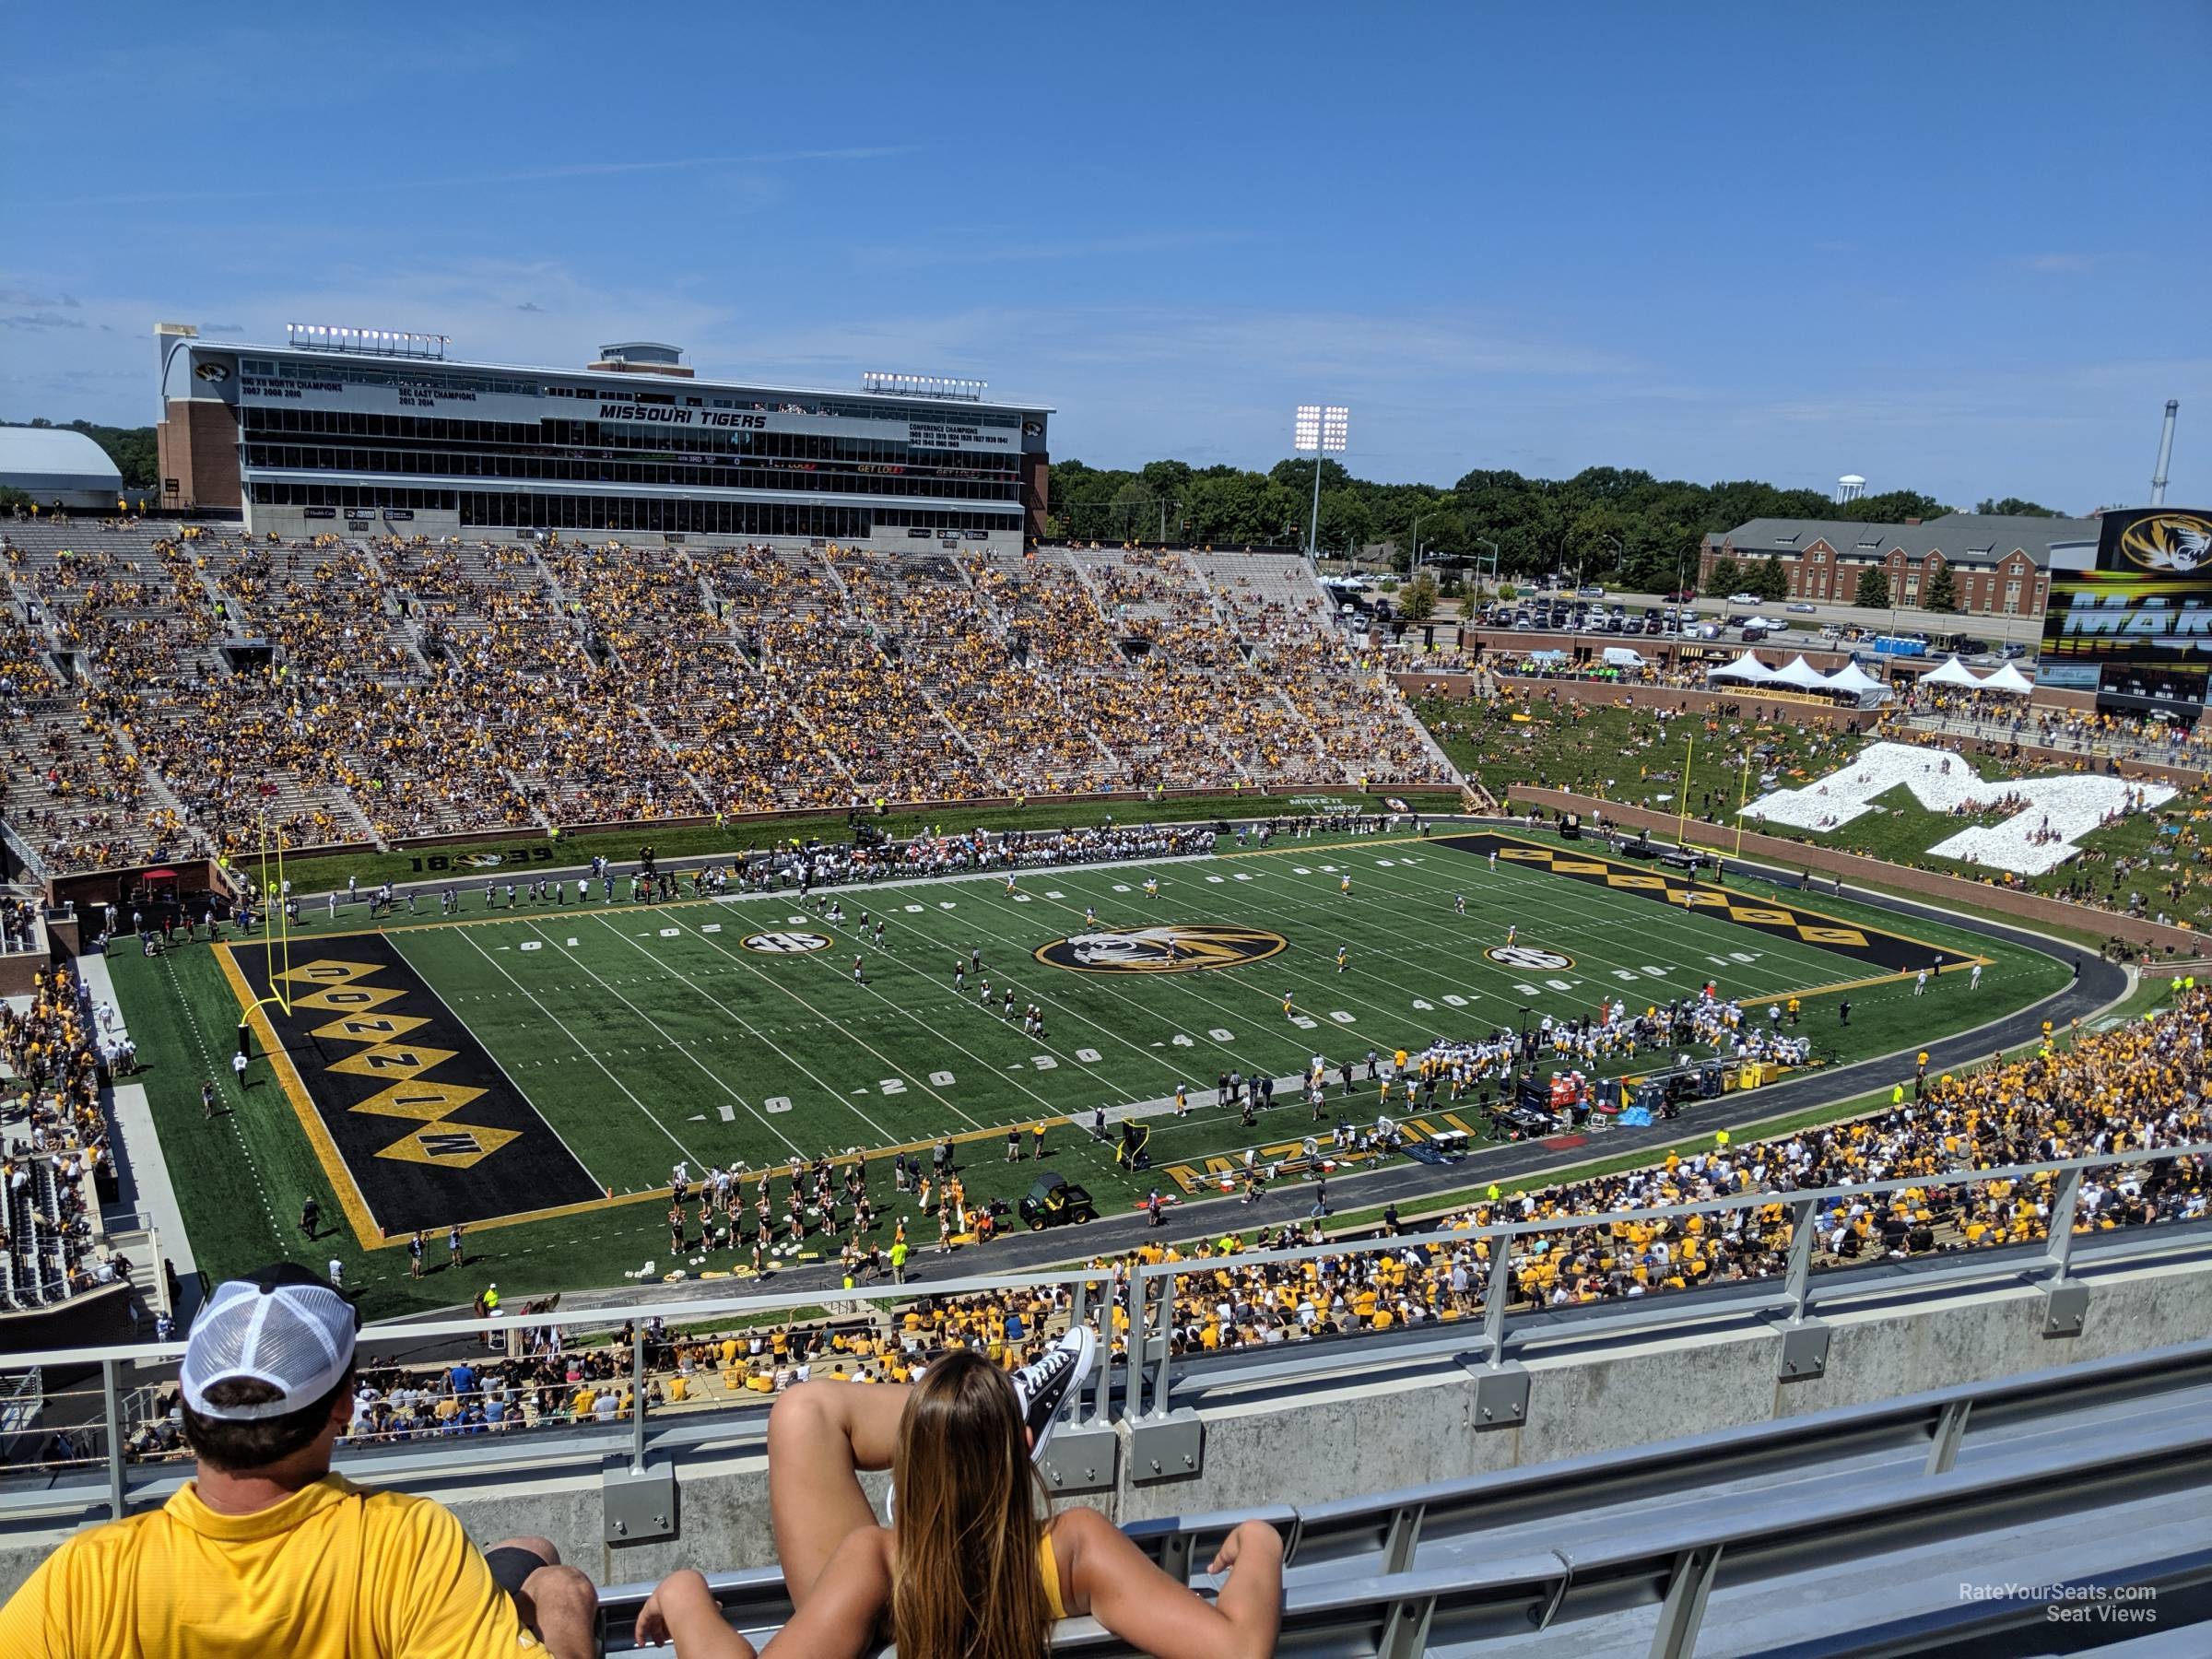 section 302, row 4 seat view  - faurot field